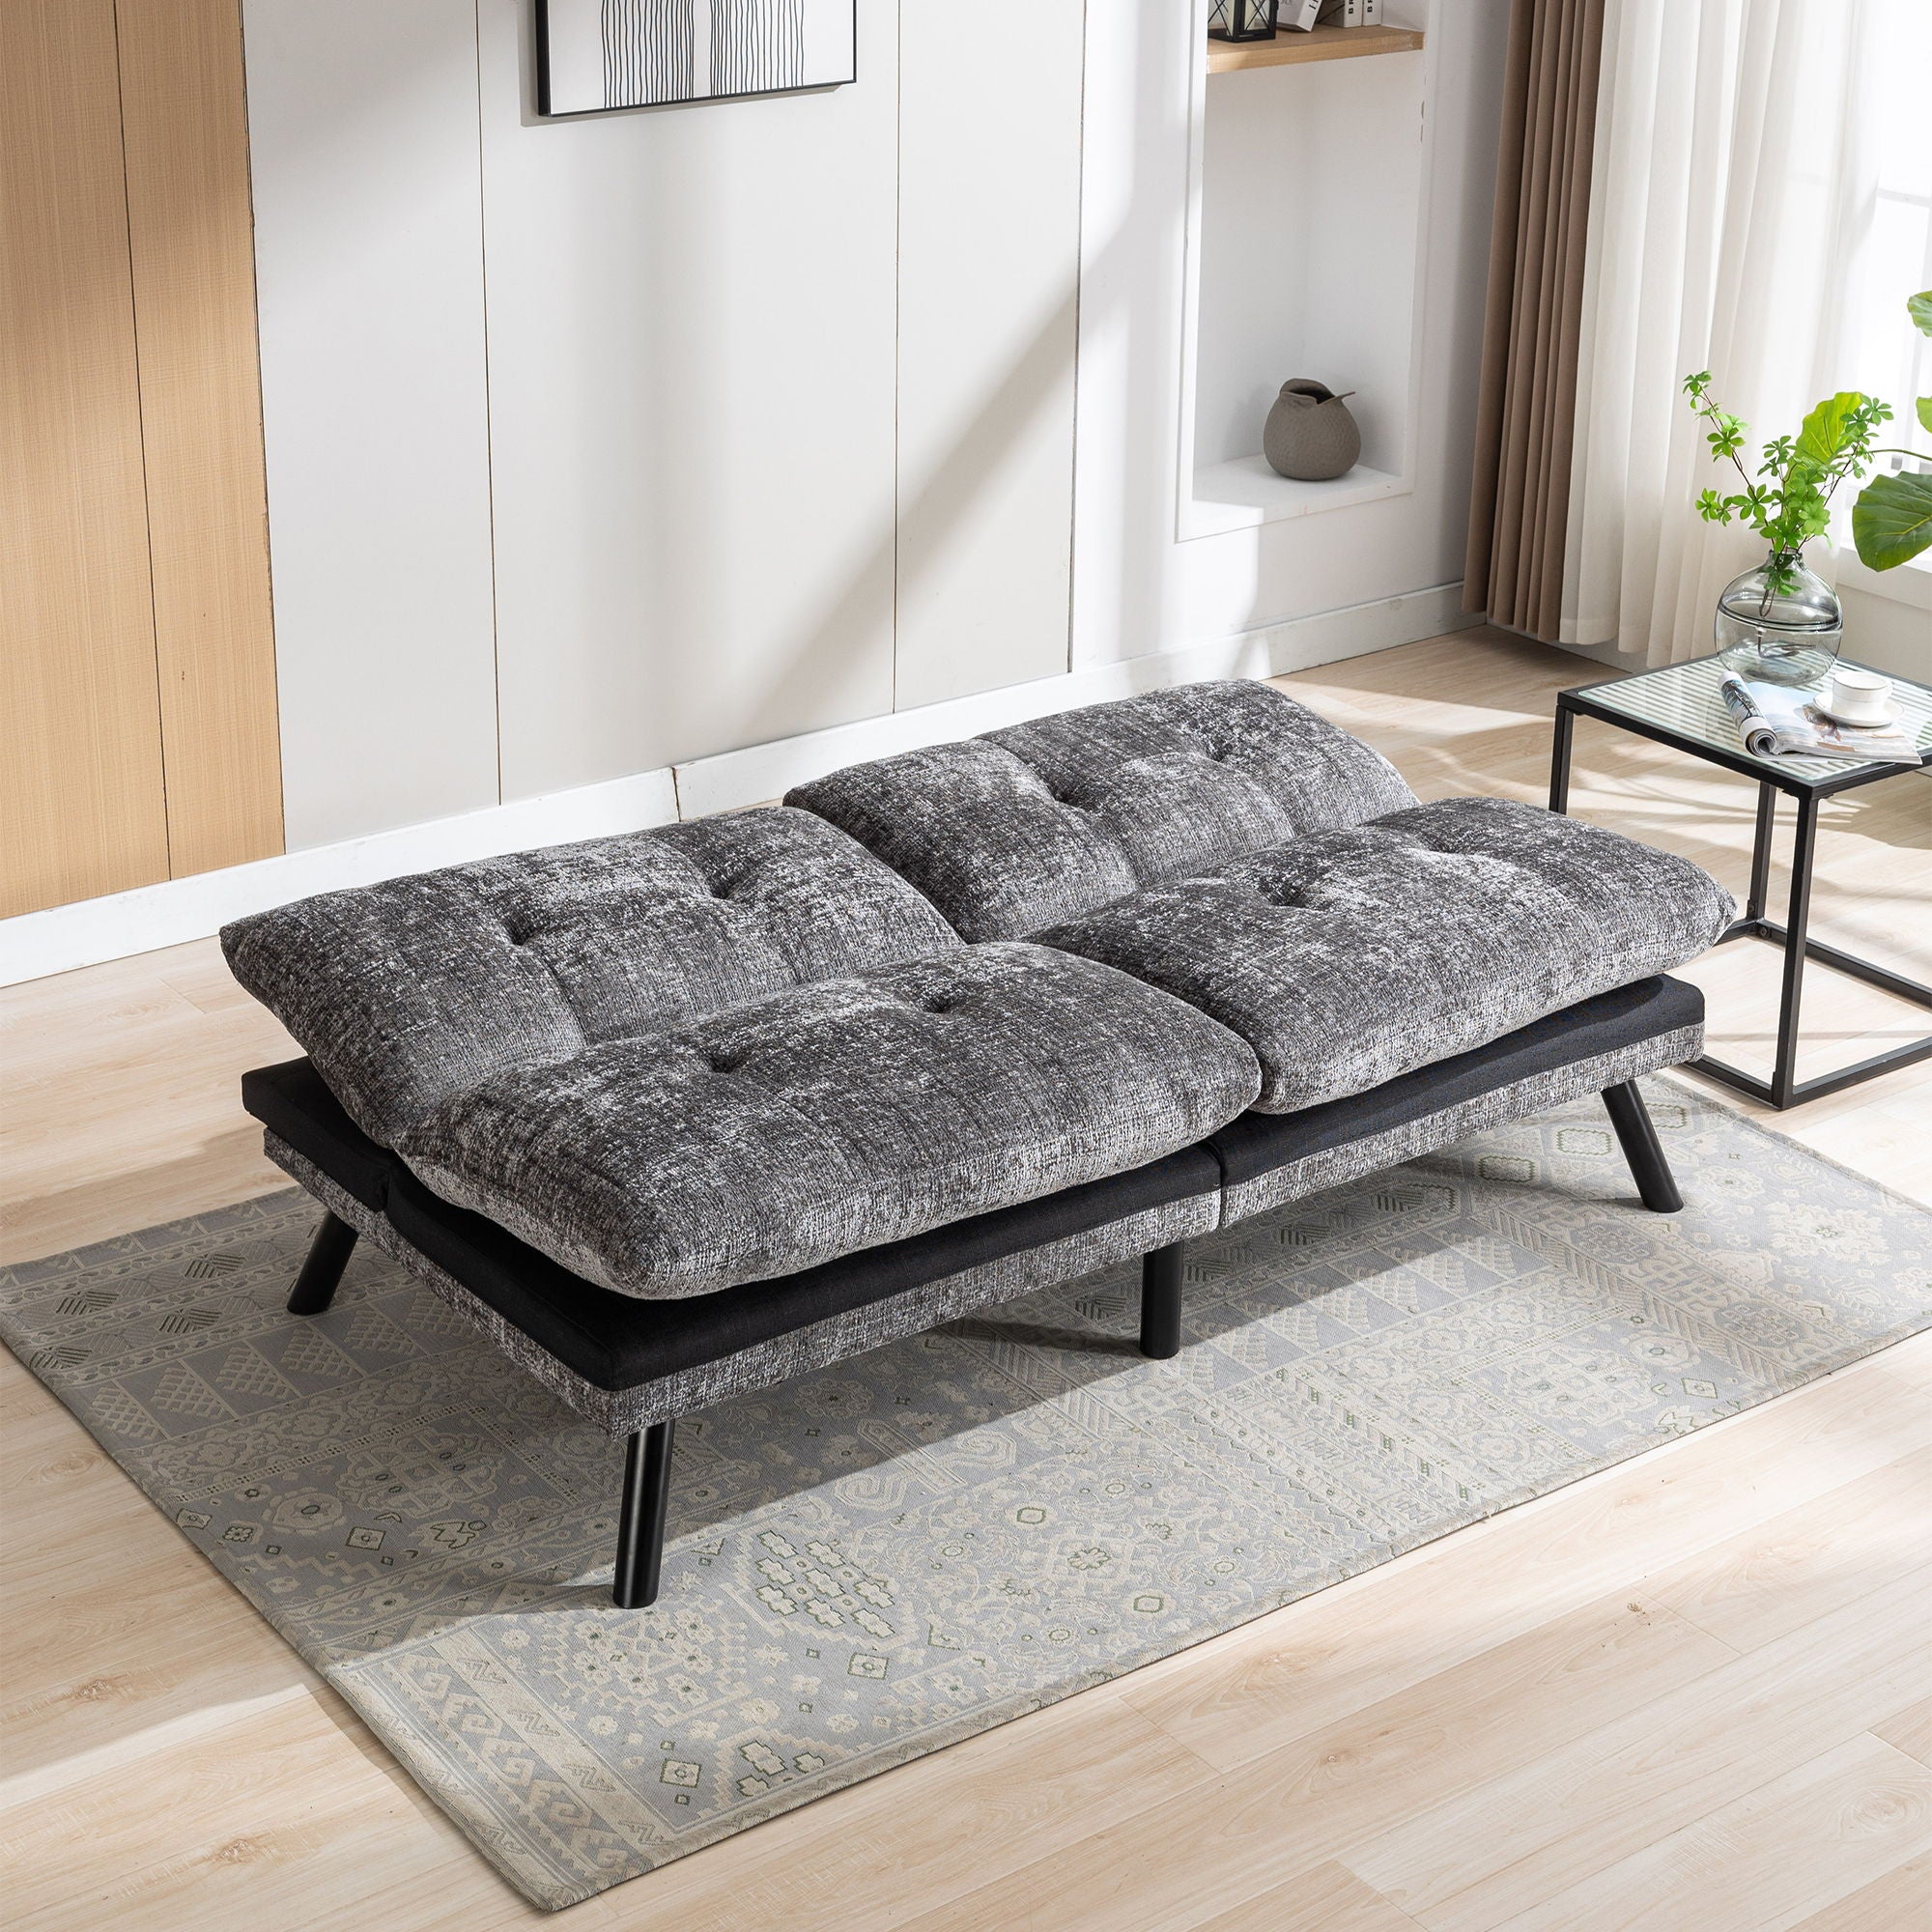 Convertible Sofa Bed Loveseat Futon Bed Breathable Adjustable Lounge Couch With Metal Legs, Futon Sets For Compact Living Space Chenille-Grey